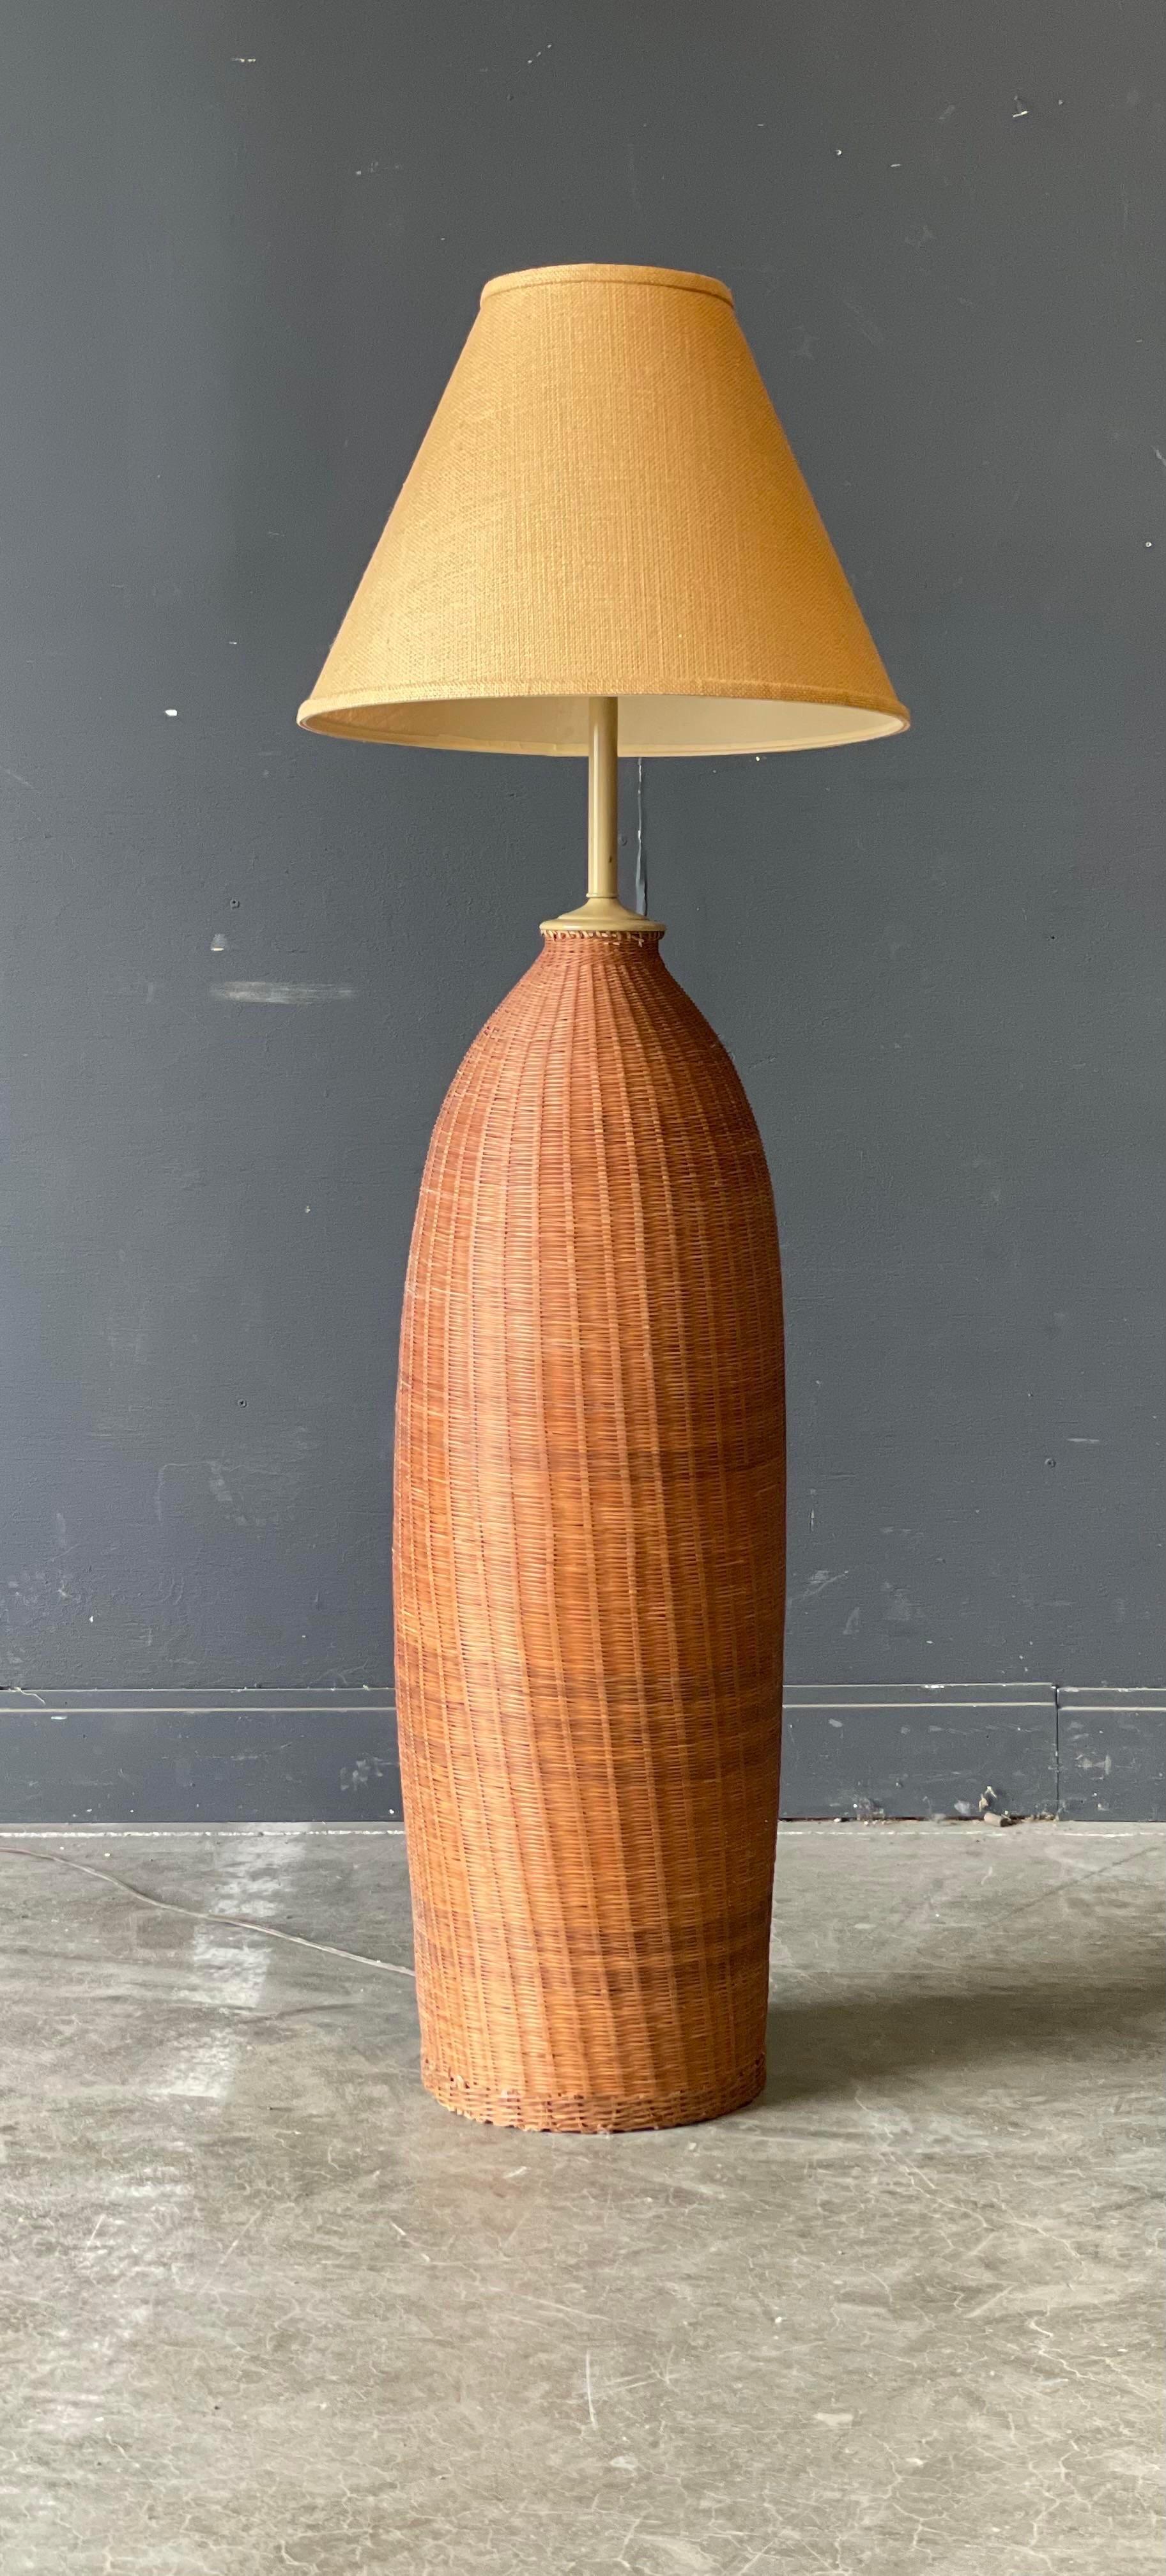 FABULOUS wicker floor lamp, great lines, the perfect addition of an organic element for layering!